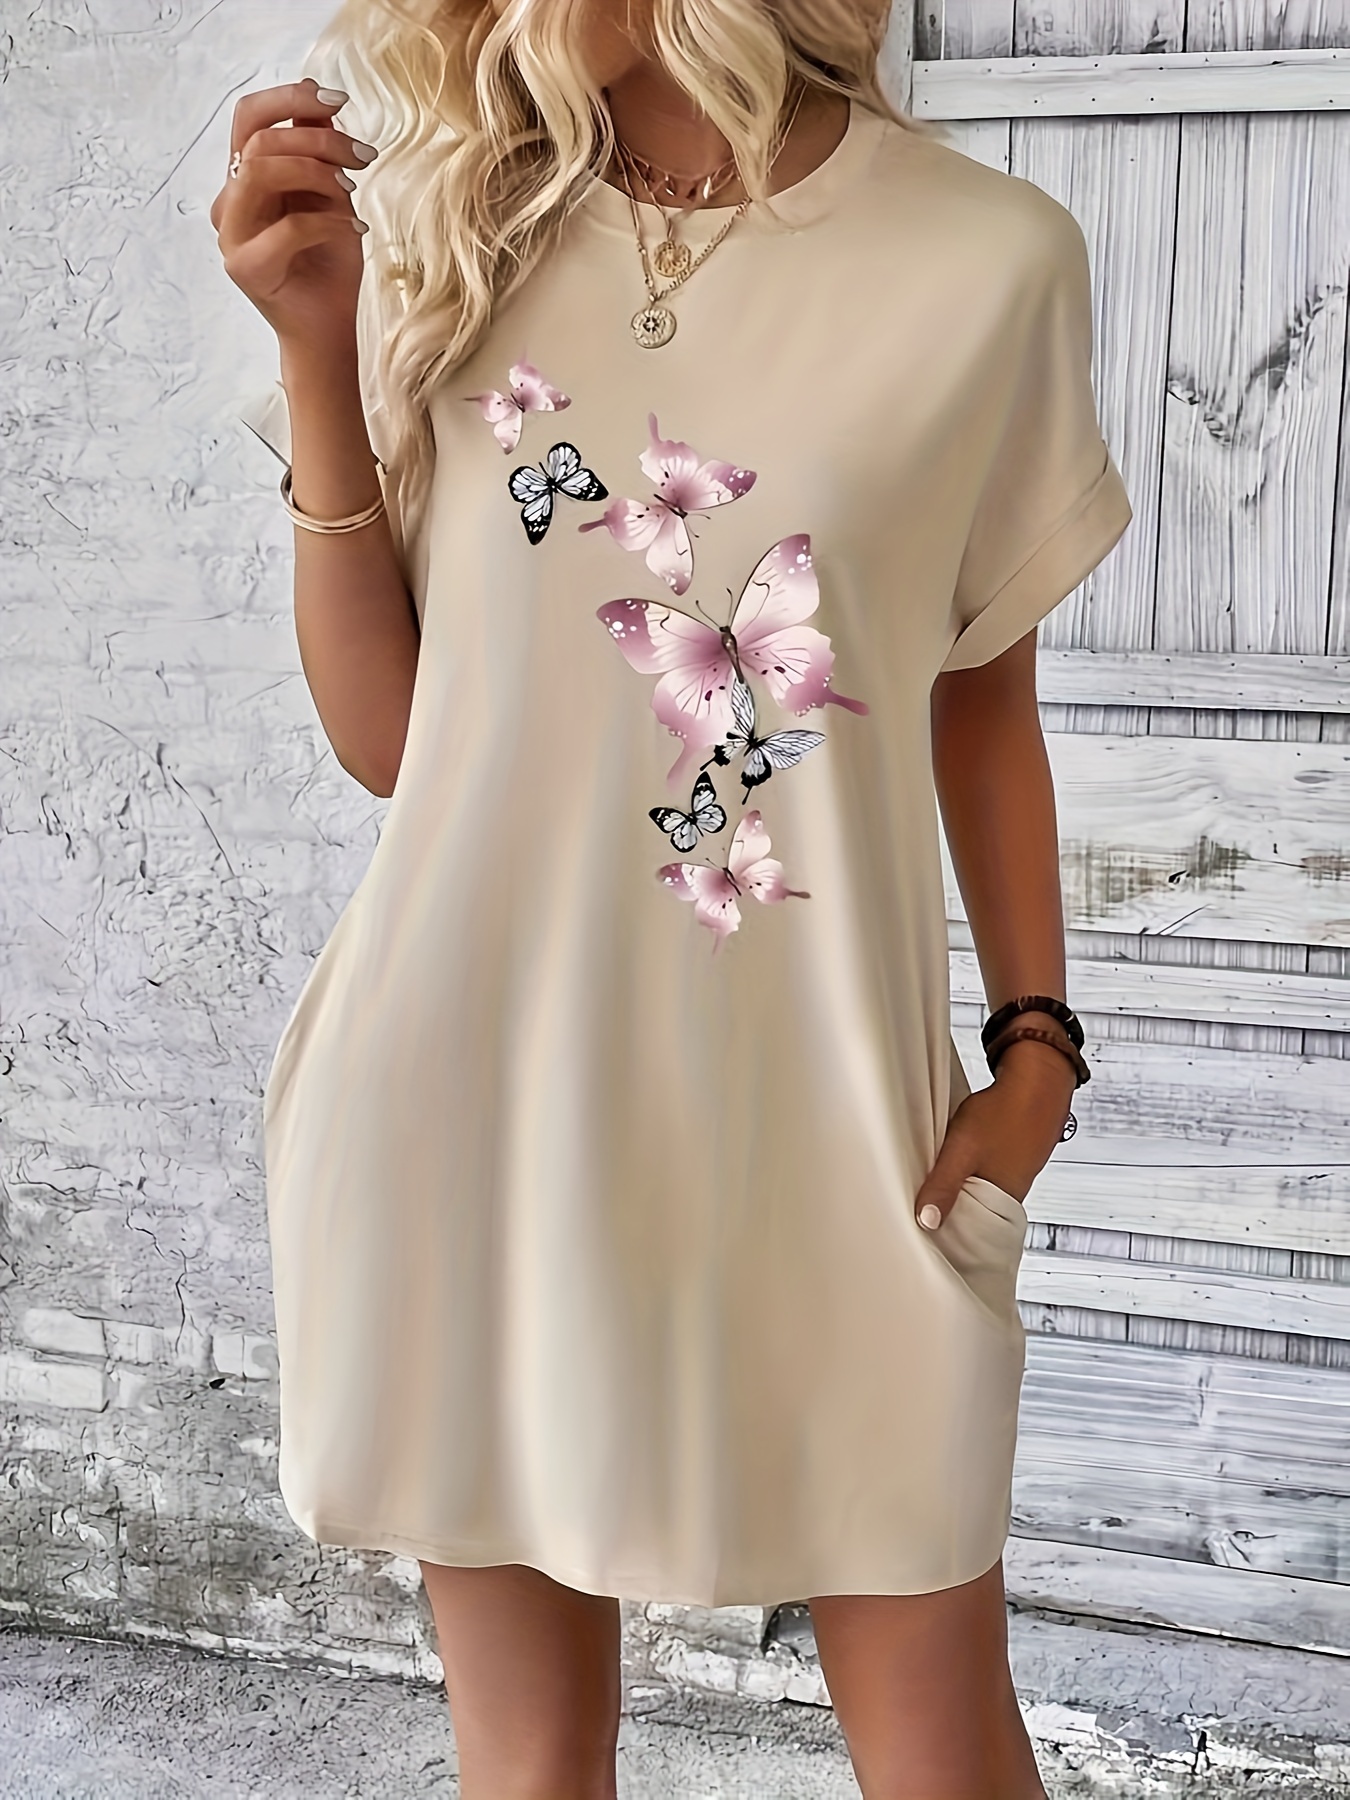 floral print crew neck dress casual short sleeve dress for spring summer womens clothing details 3